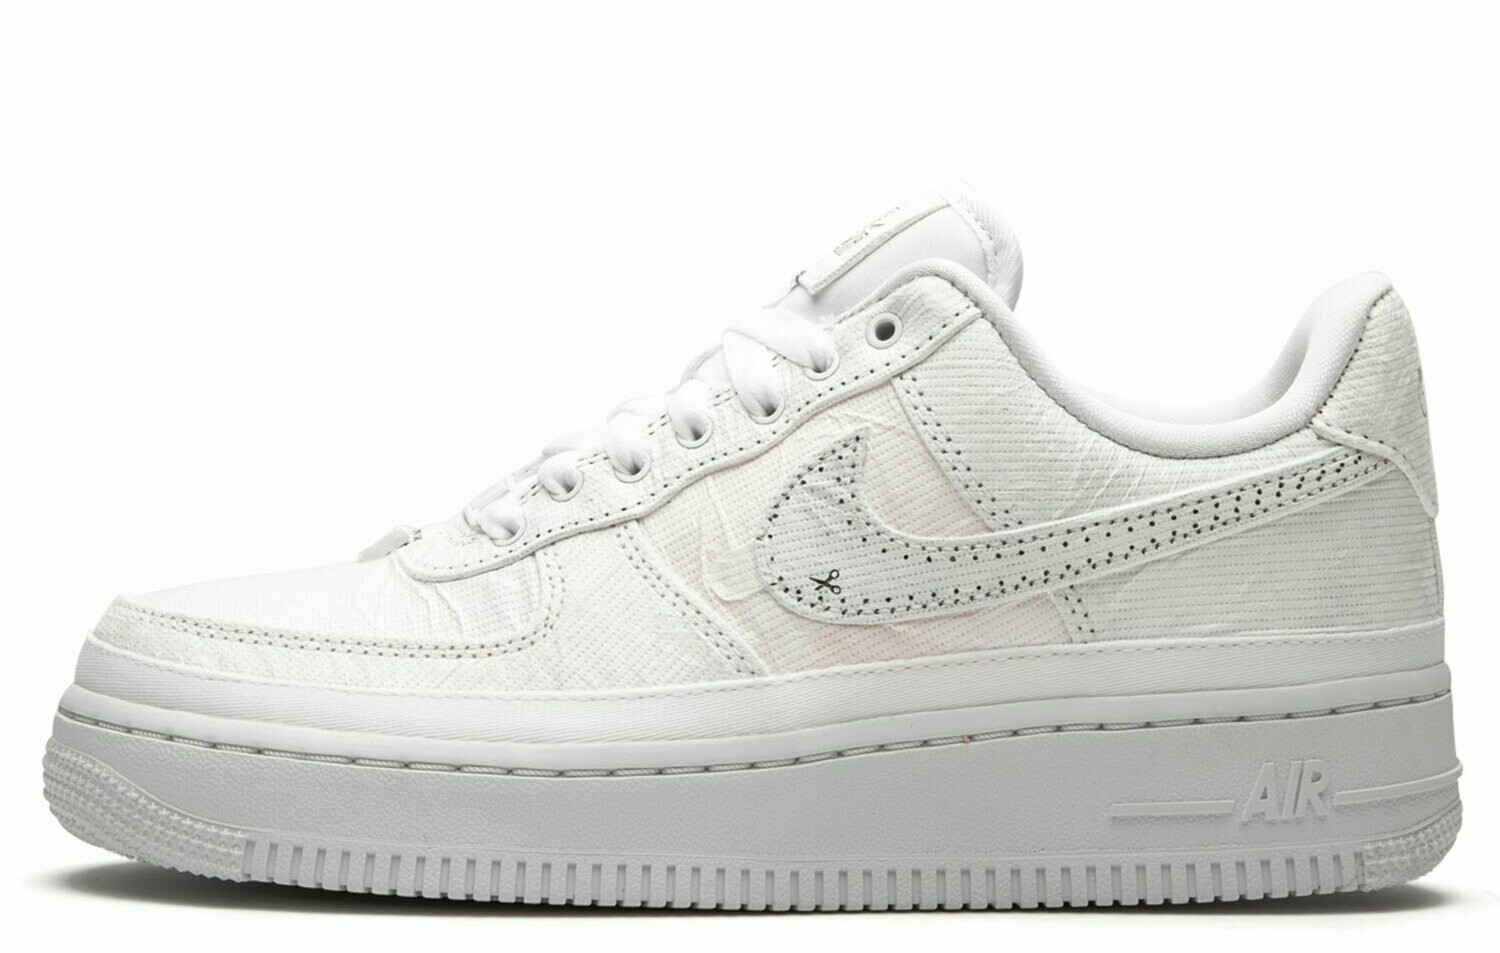 Air Force 1 Low LX "Reveal"